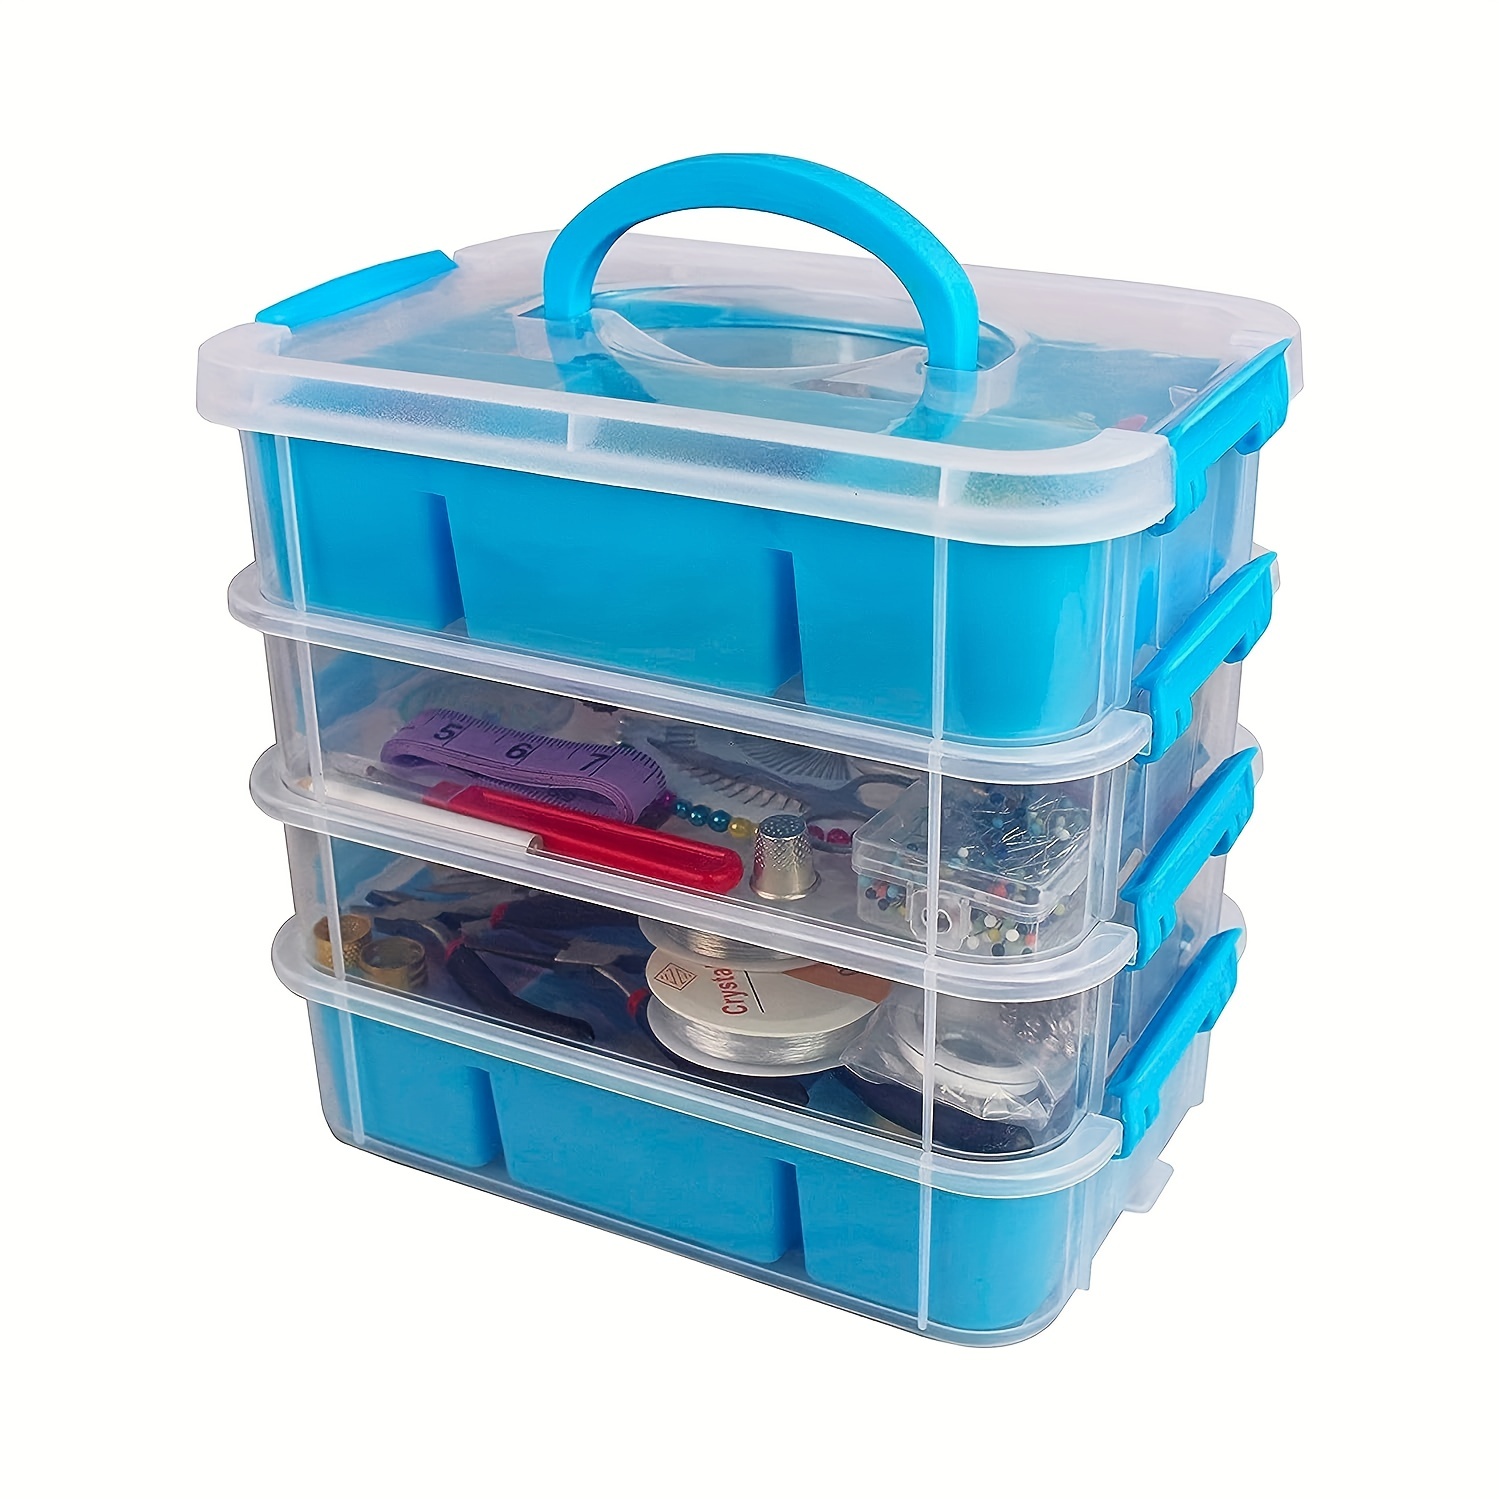 1pc Craft Organizer Box, 3-Layer Small Stackable Storage Container Case,  With Adjustable Compartments For Beads, Crafts, Jewelry, Fishing Tackle,  Kids Toys (6x6x5inch)